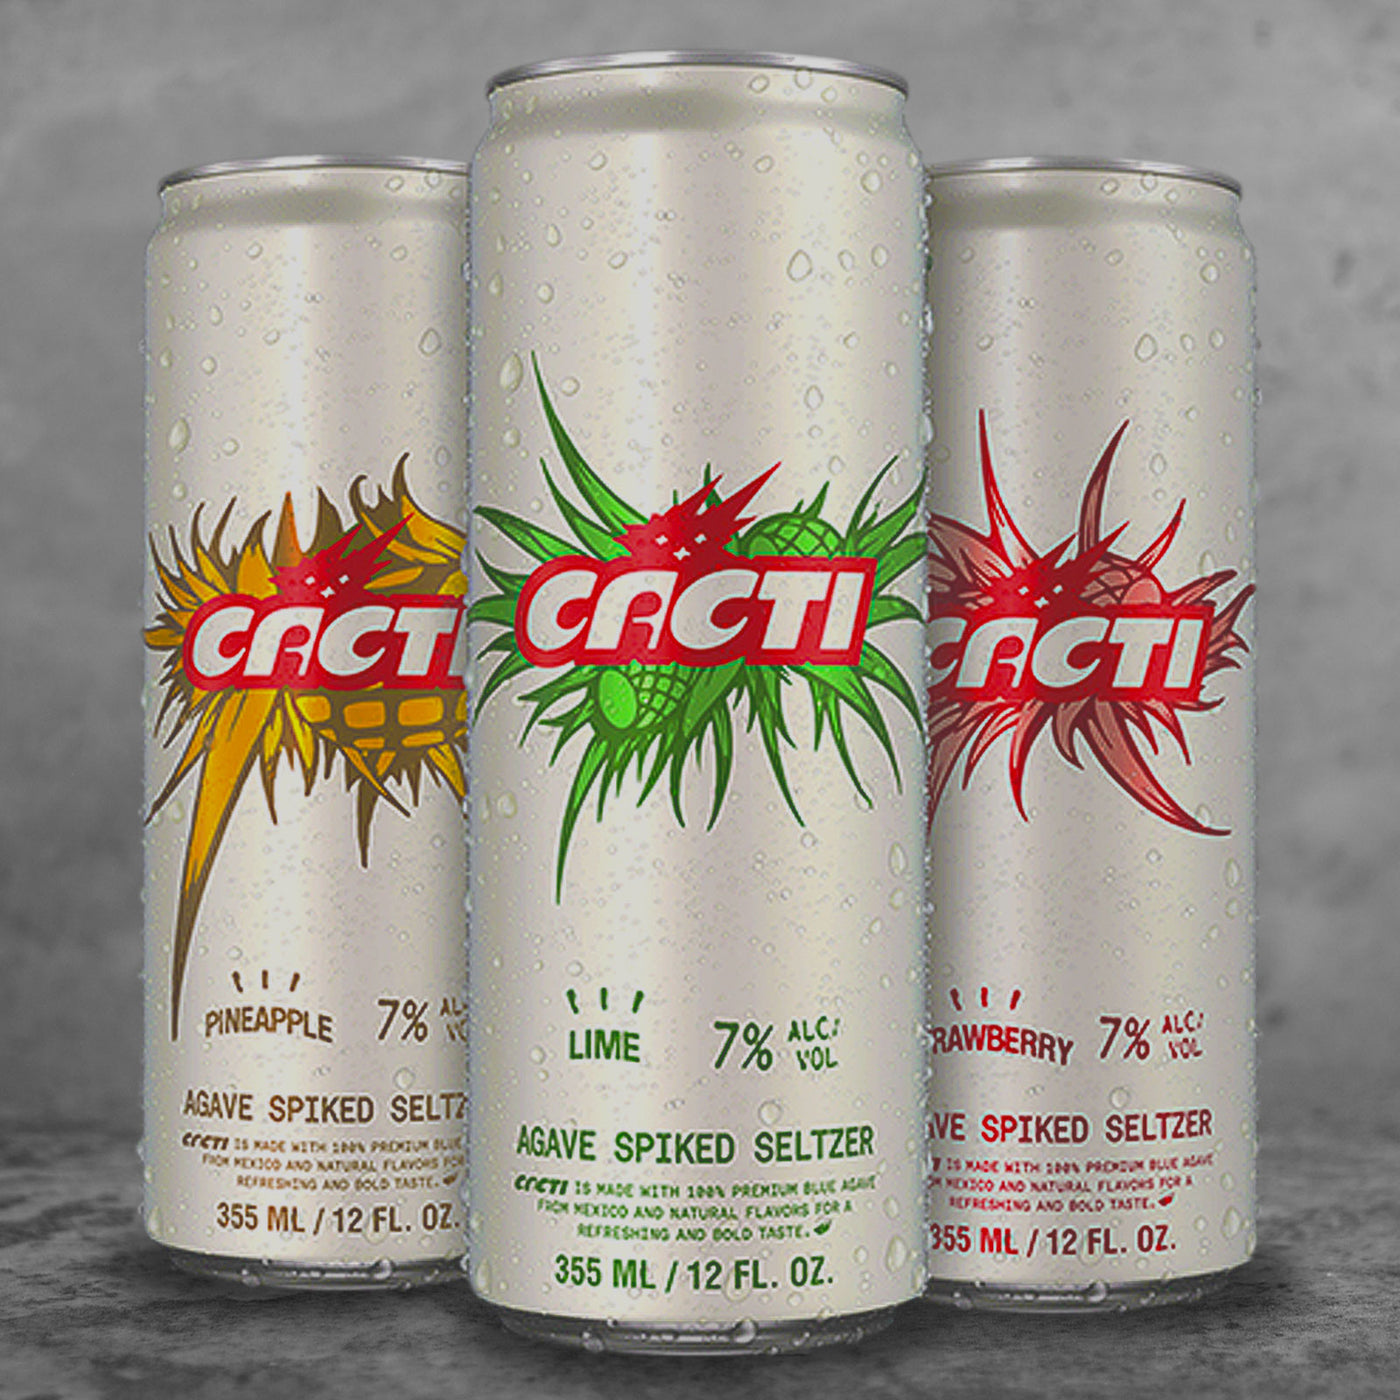 Cacti Agave Spiked Seltzer Mix Pack - Limit 1